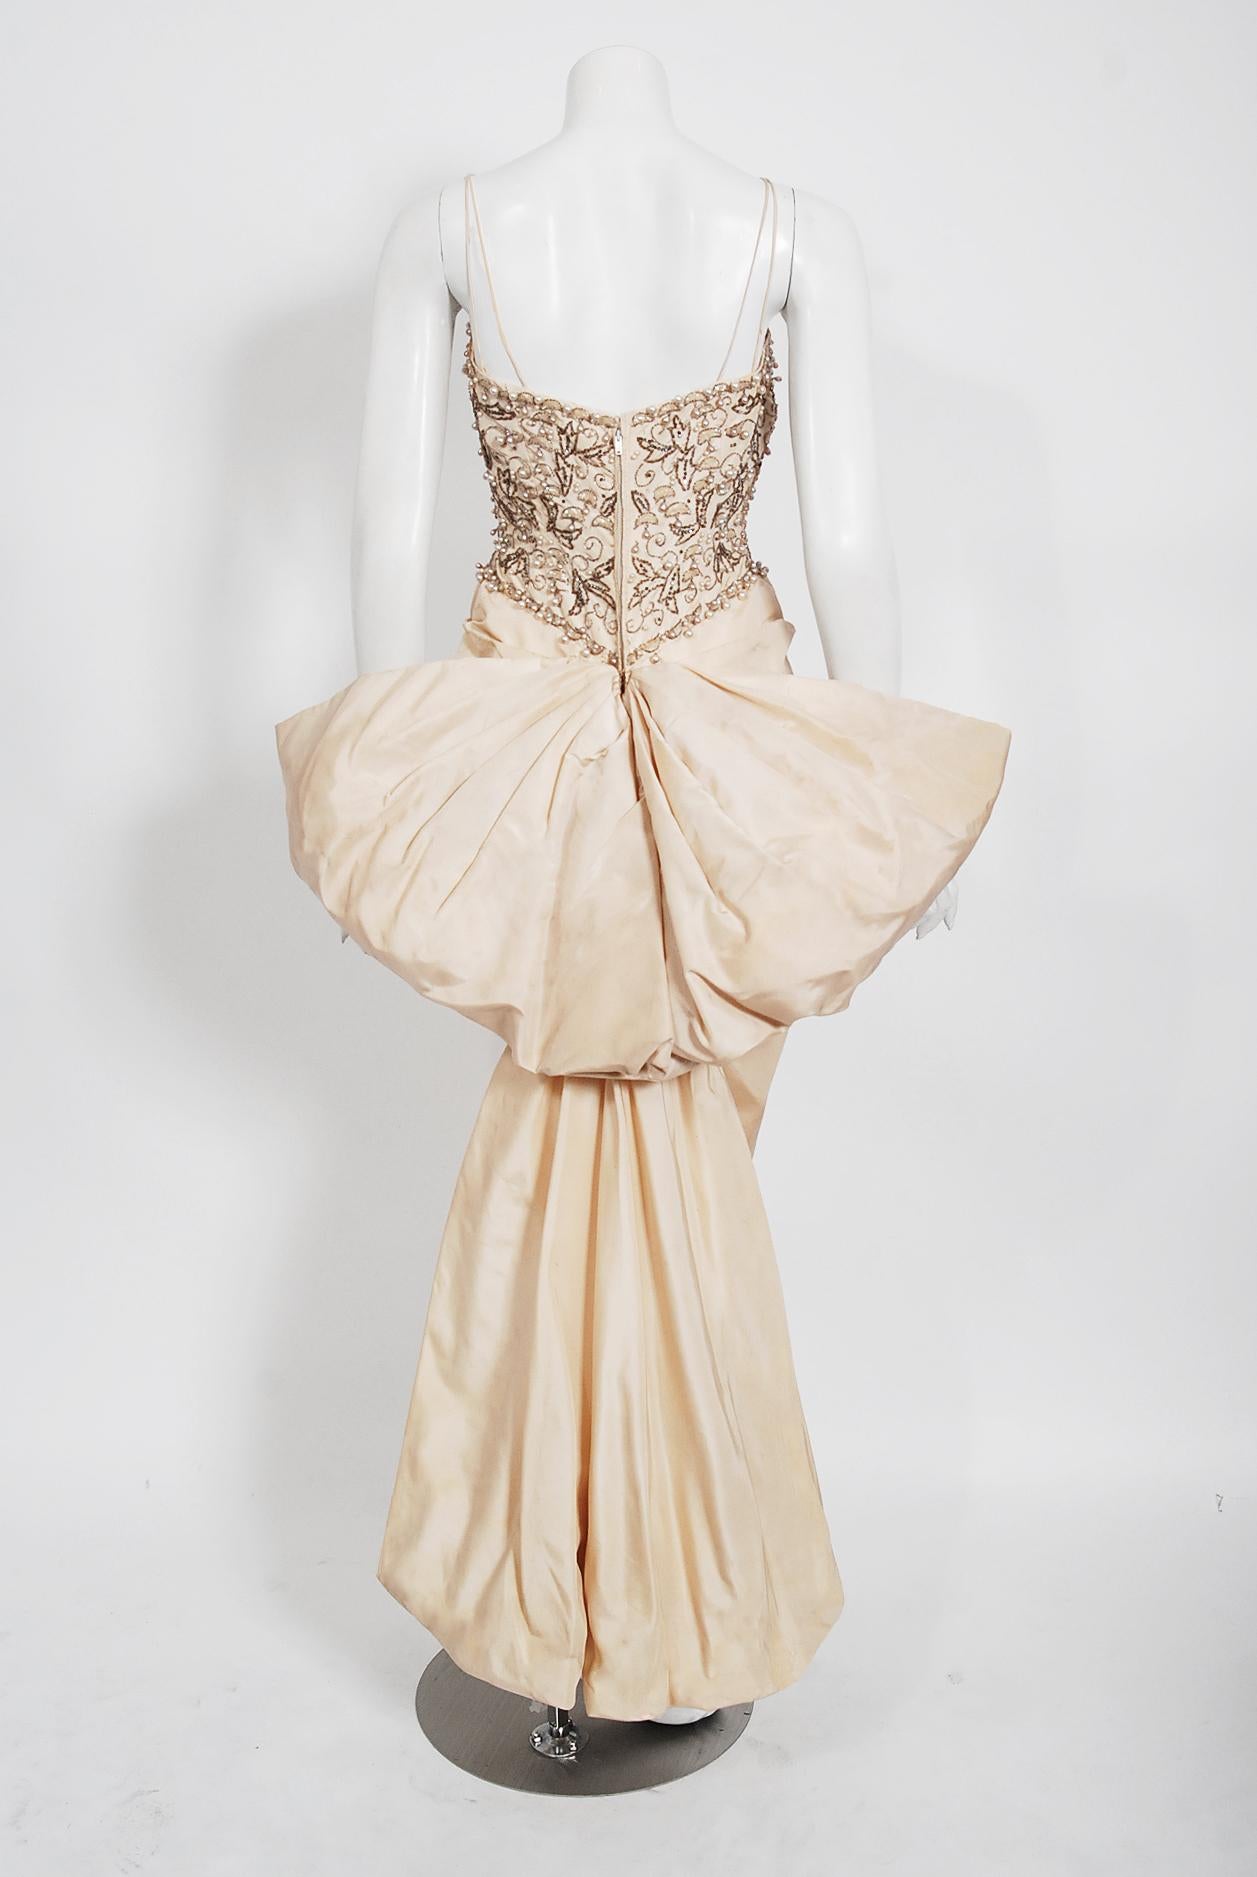 1950's Custom Couture Beaded Jeweled Ivory Silk Hourglass Back-Bow Bridal Gown For Sale 2